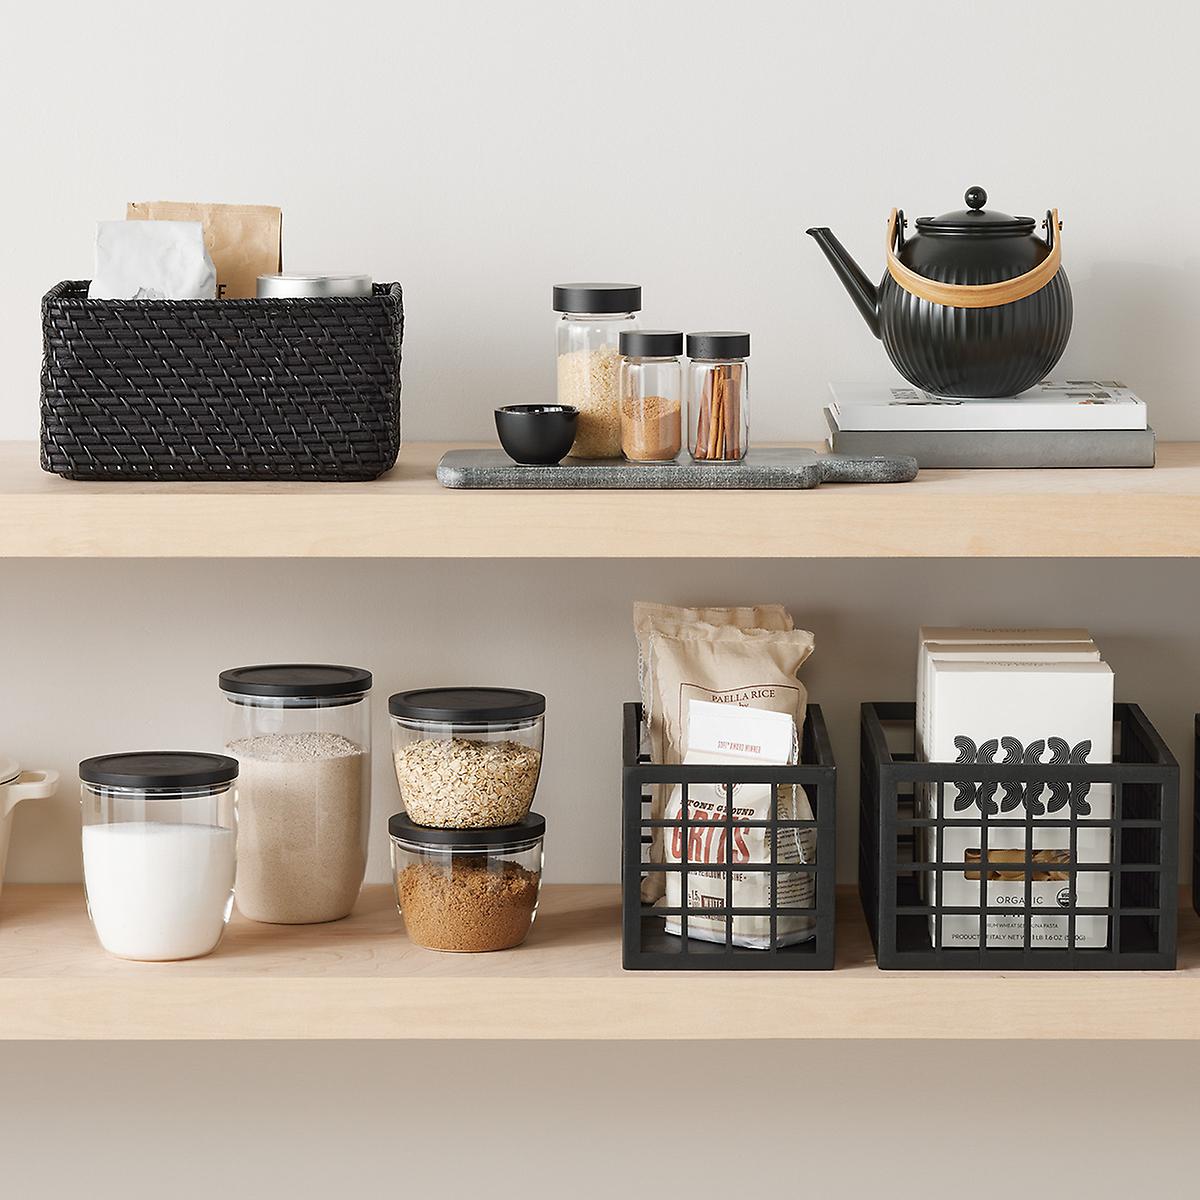 https://www.containerstore.com/catalogimages/473234/10085830G_Small_Ori_Curved_Rattan_Bi.jpg